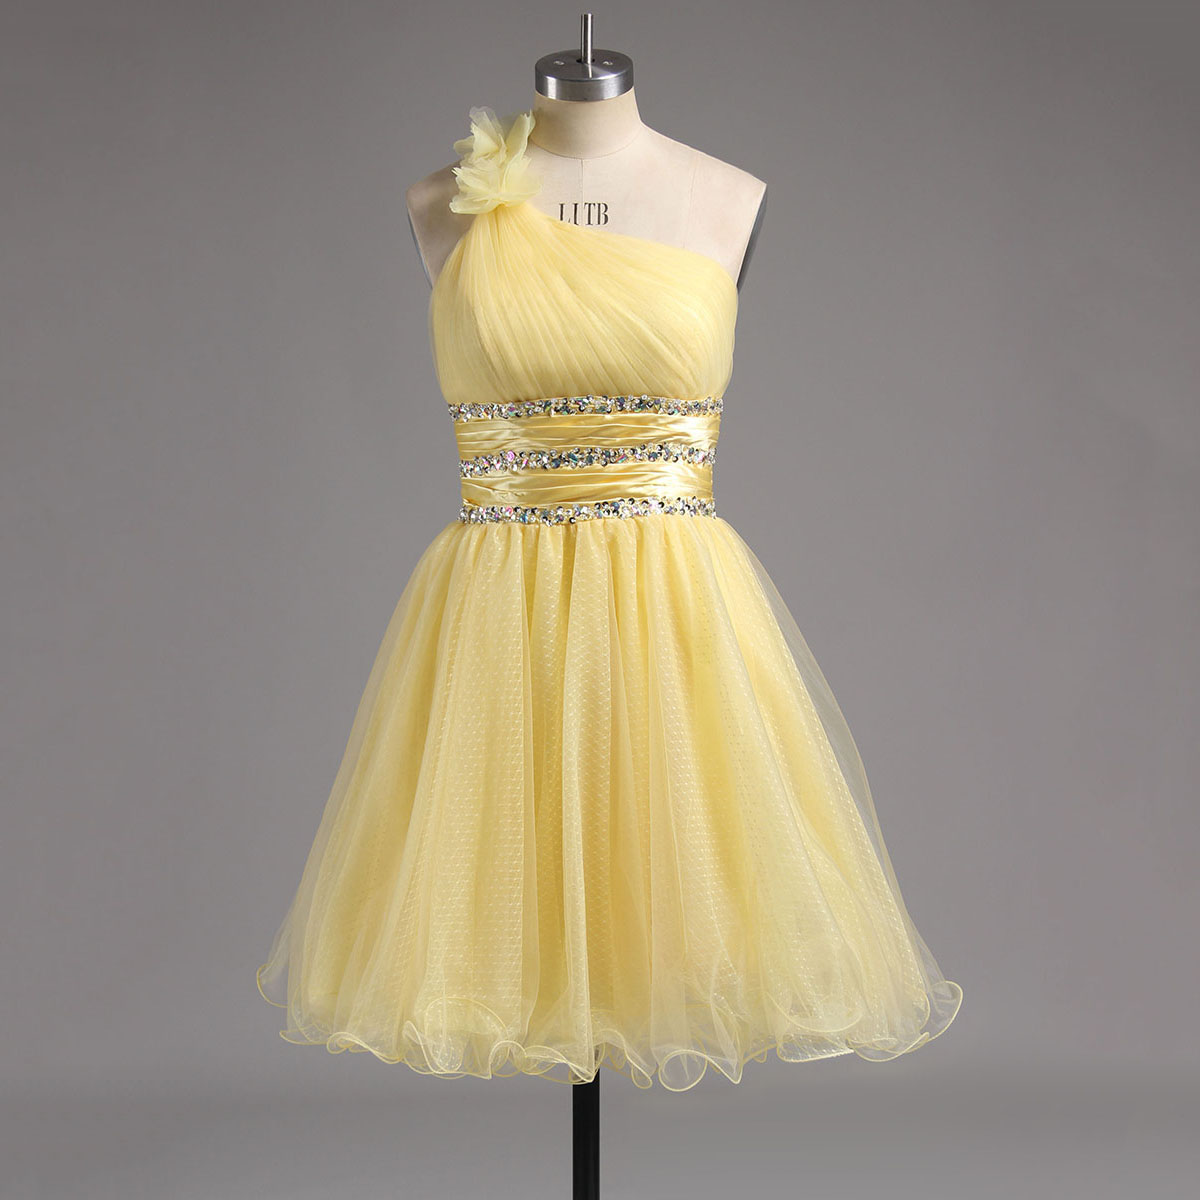 Princess Light Yellow Short Homecoming Dress, Asymmetric Tulle Homecoming Dress with Beaded Ribbon, Floral One Shoulder Homecoming Dress